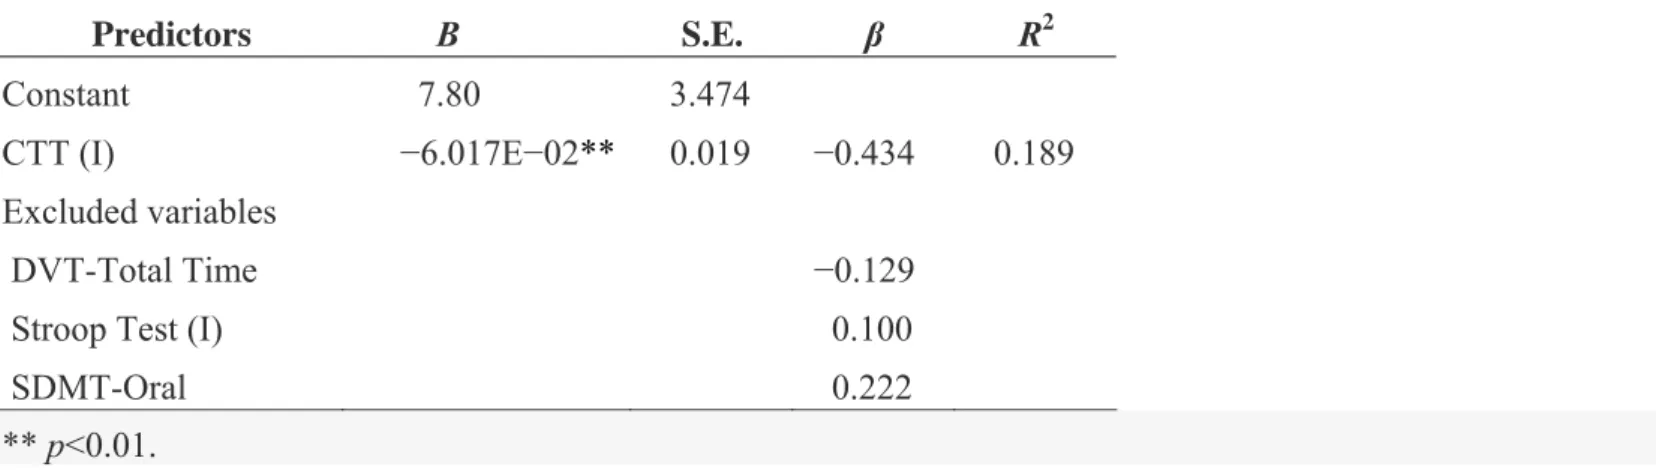 Table 4. Summary of stepwise regression analysis for variables predicting the JLOT 